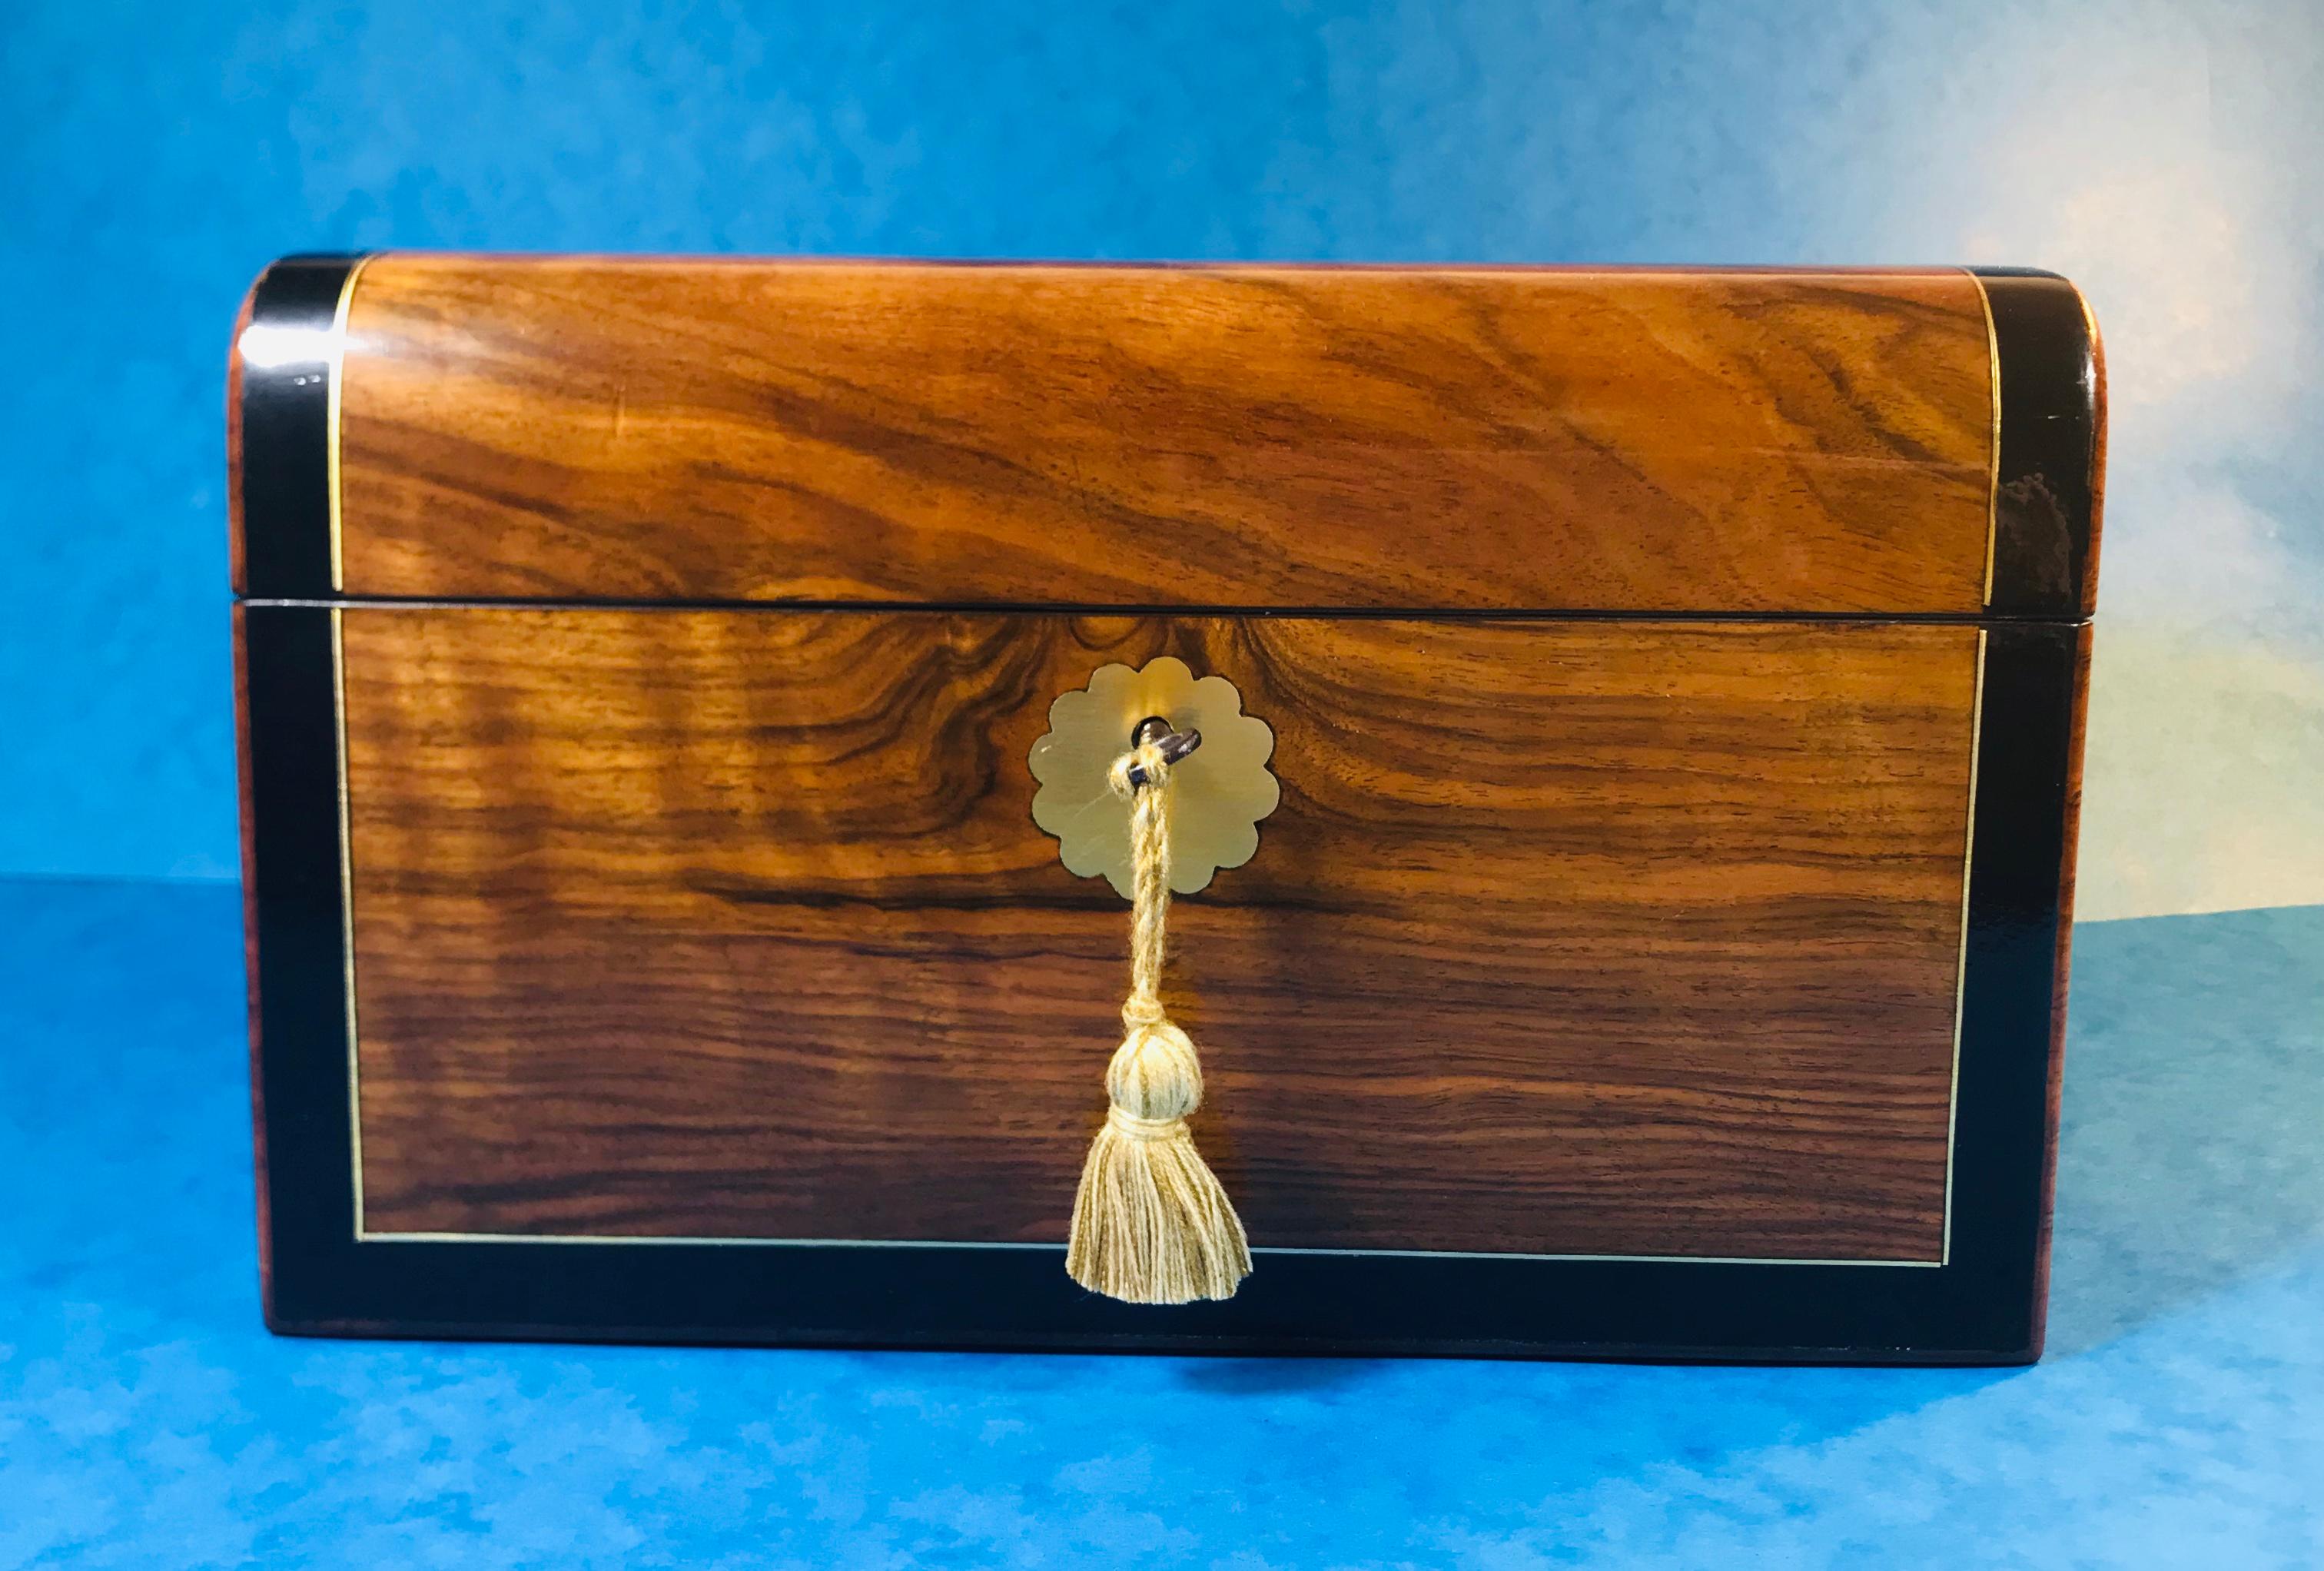 Victorian circa 1870 walnut jewelry box.
A beautiful jewelry box with a dome shaped top, inlaid with brass, ebony banded and crossbanded in Tulipwood. The box has a brass top and key escutcheon and a working lock and key. Open the box to reveal a